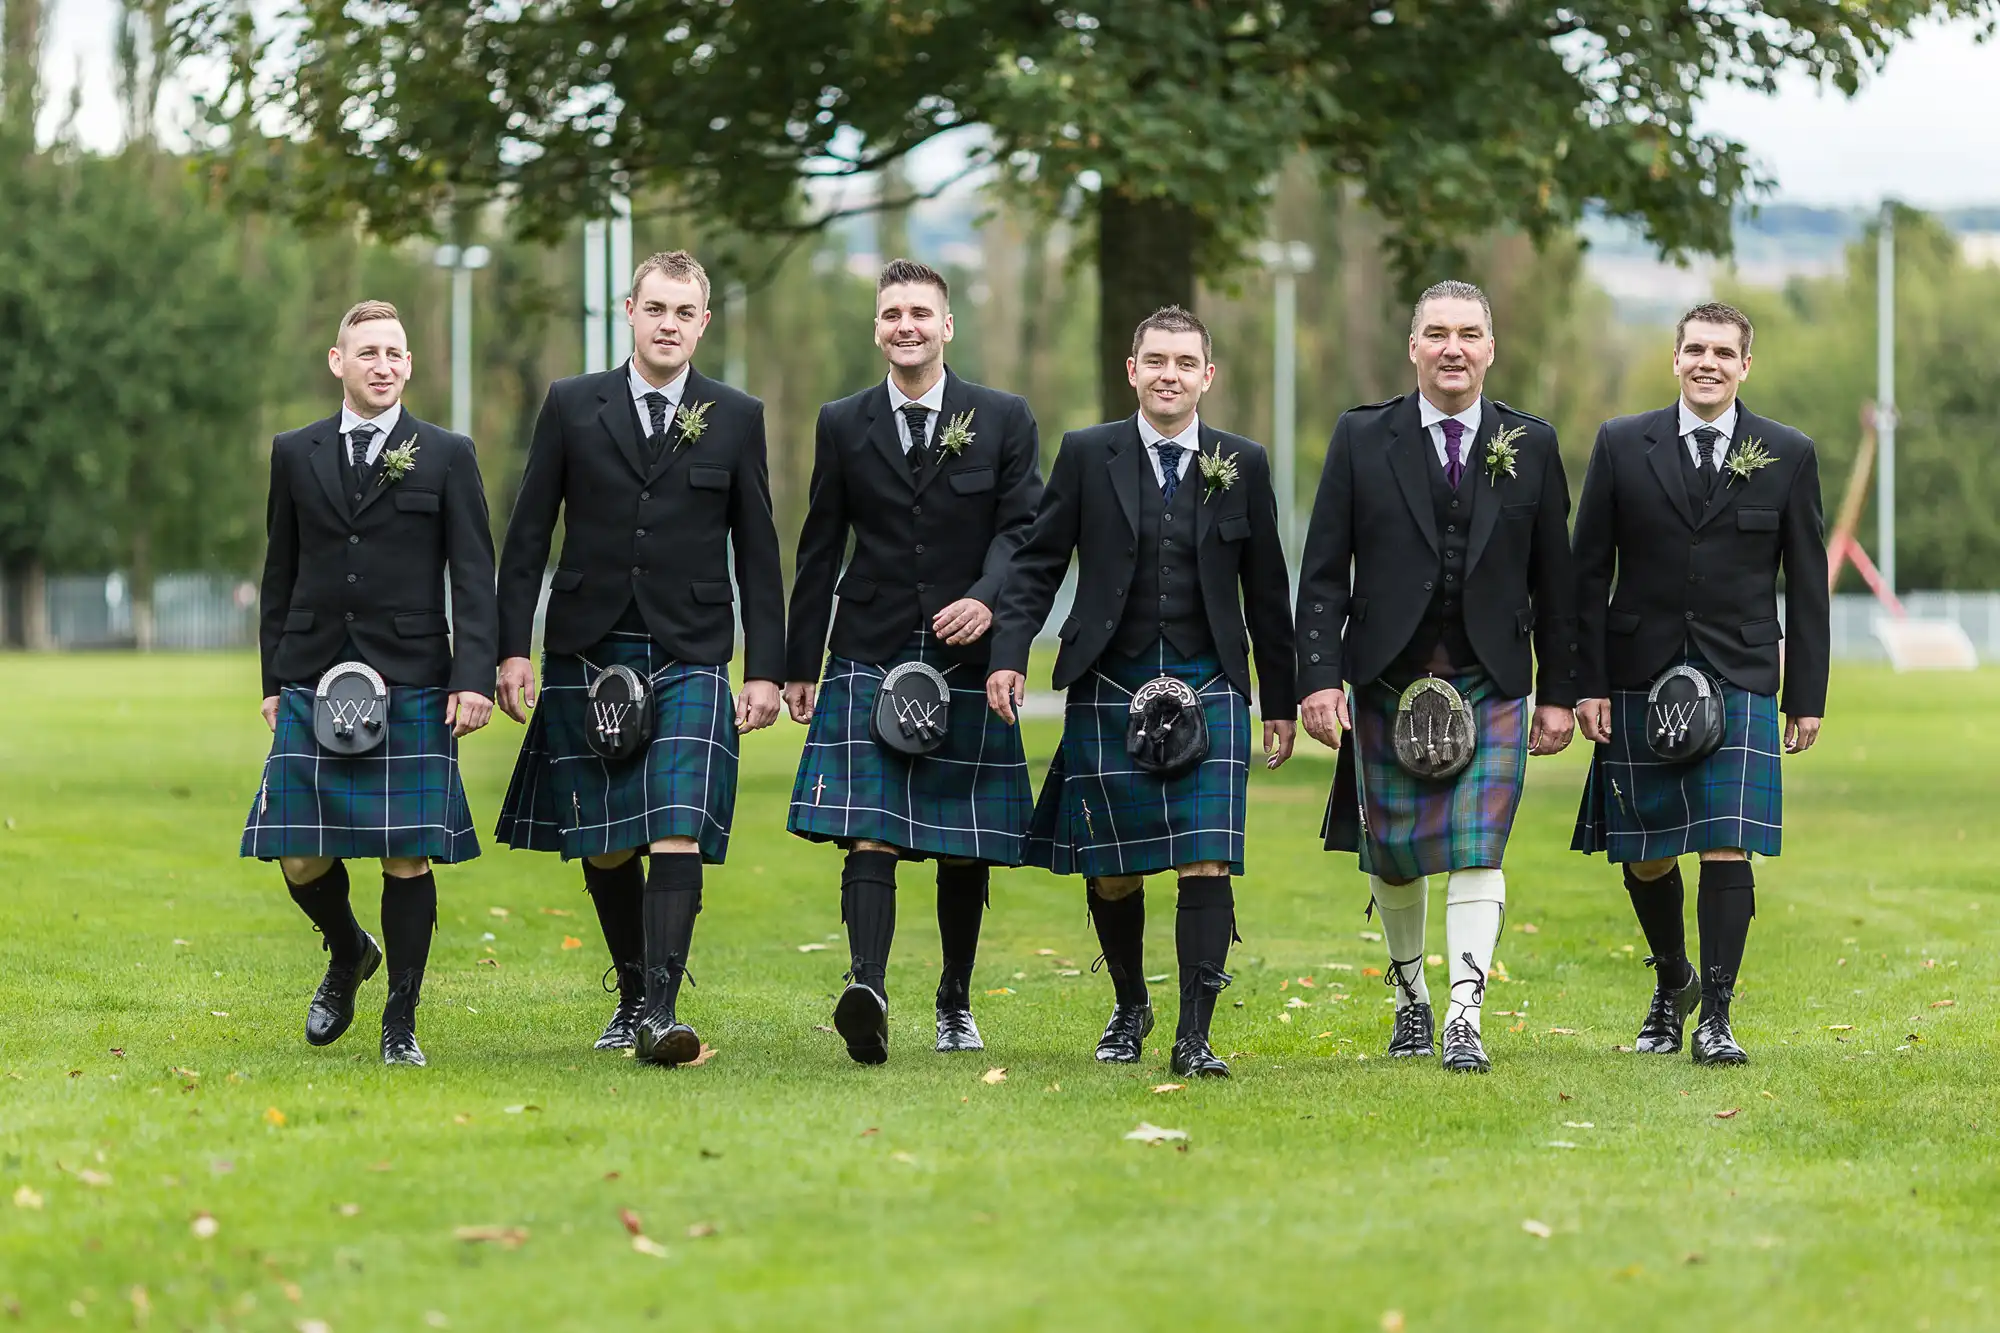 Six men in traditional scottish kilts and jackets walking side by side on a grassy field, smiling.